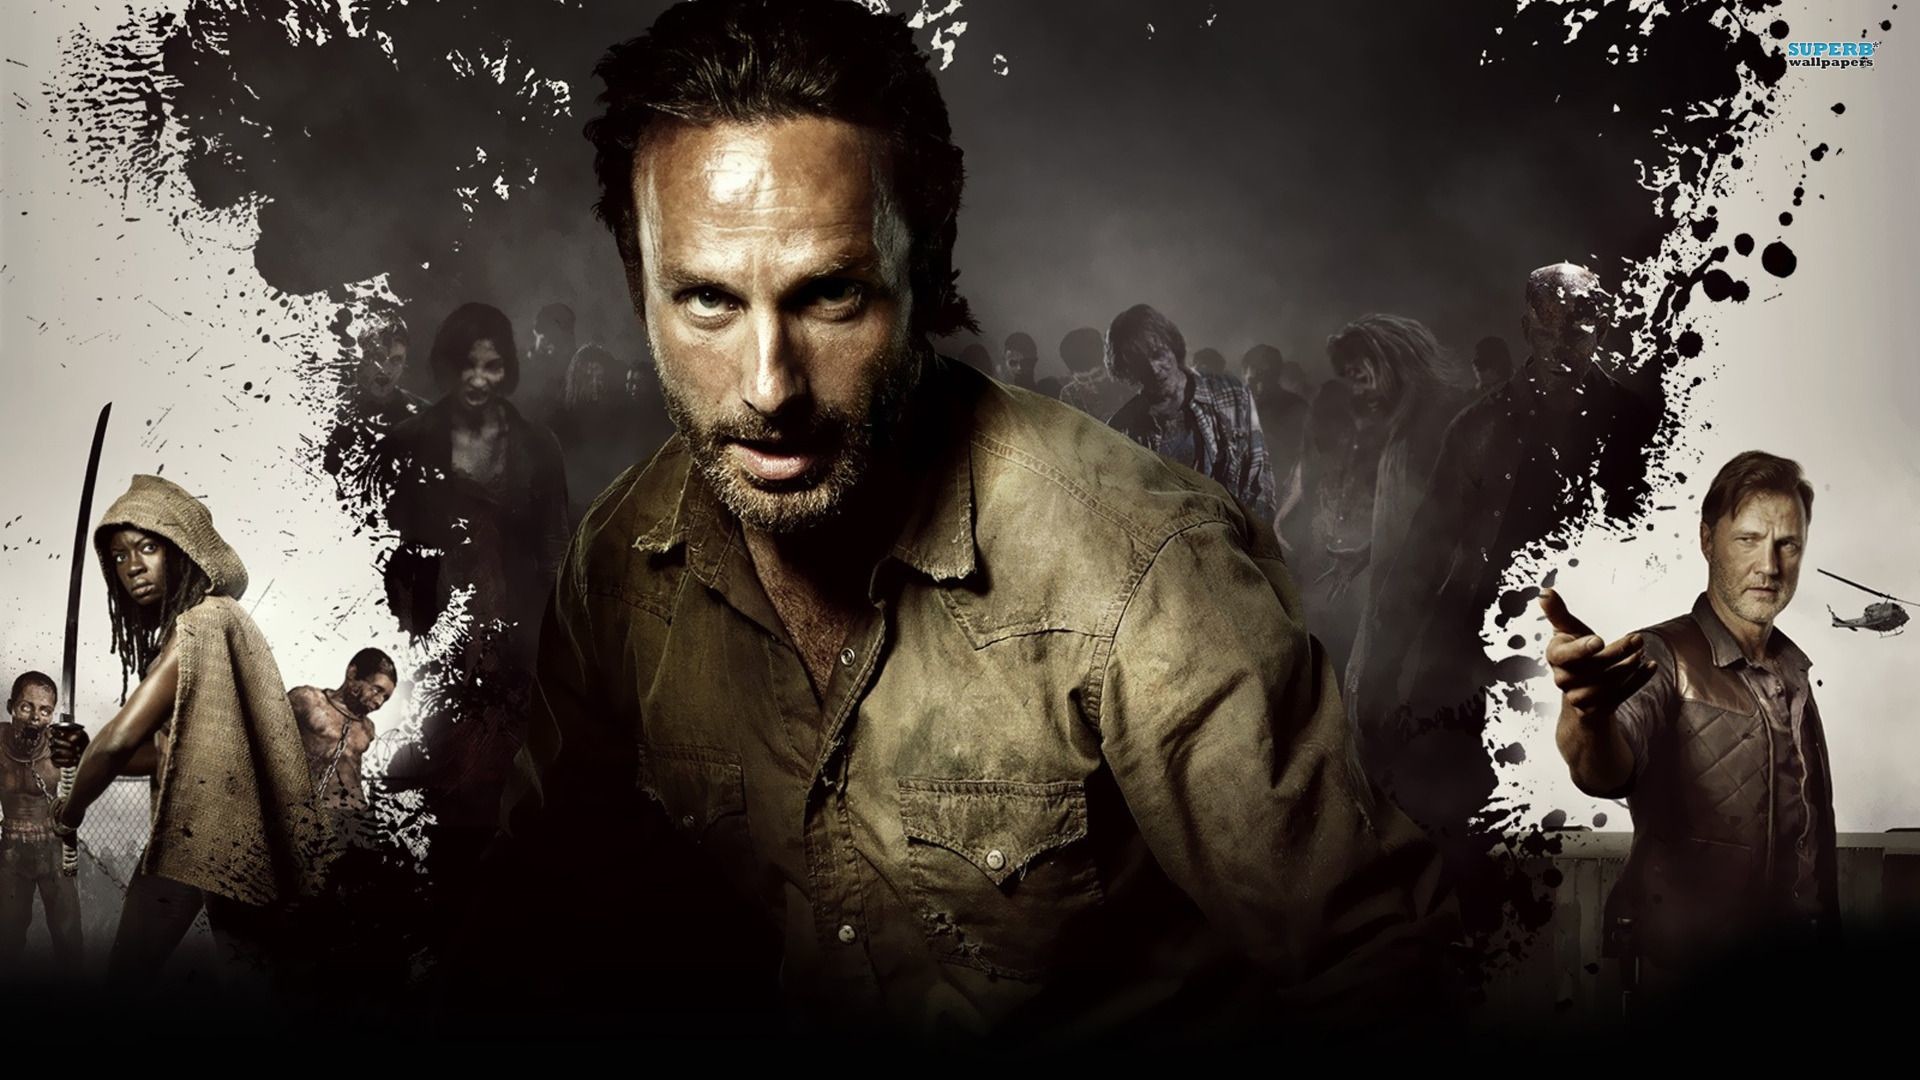 1920x1080 The walking dead wallpaper for android Group 1920Ã1080 The Walking Dead  Wallpapers 1920Ã